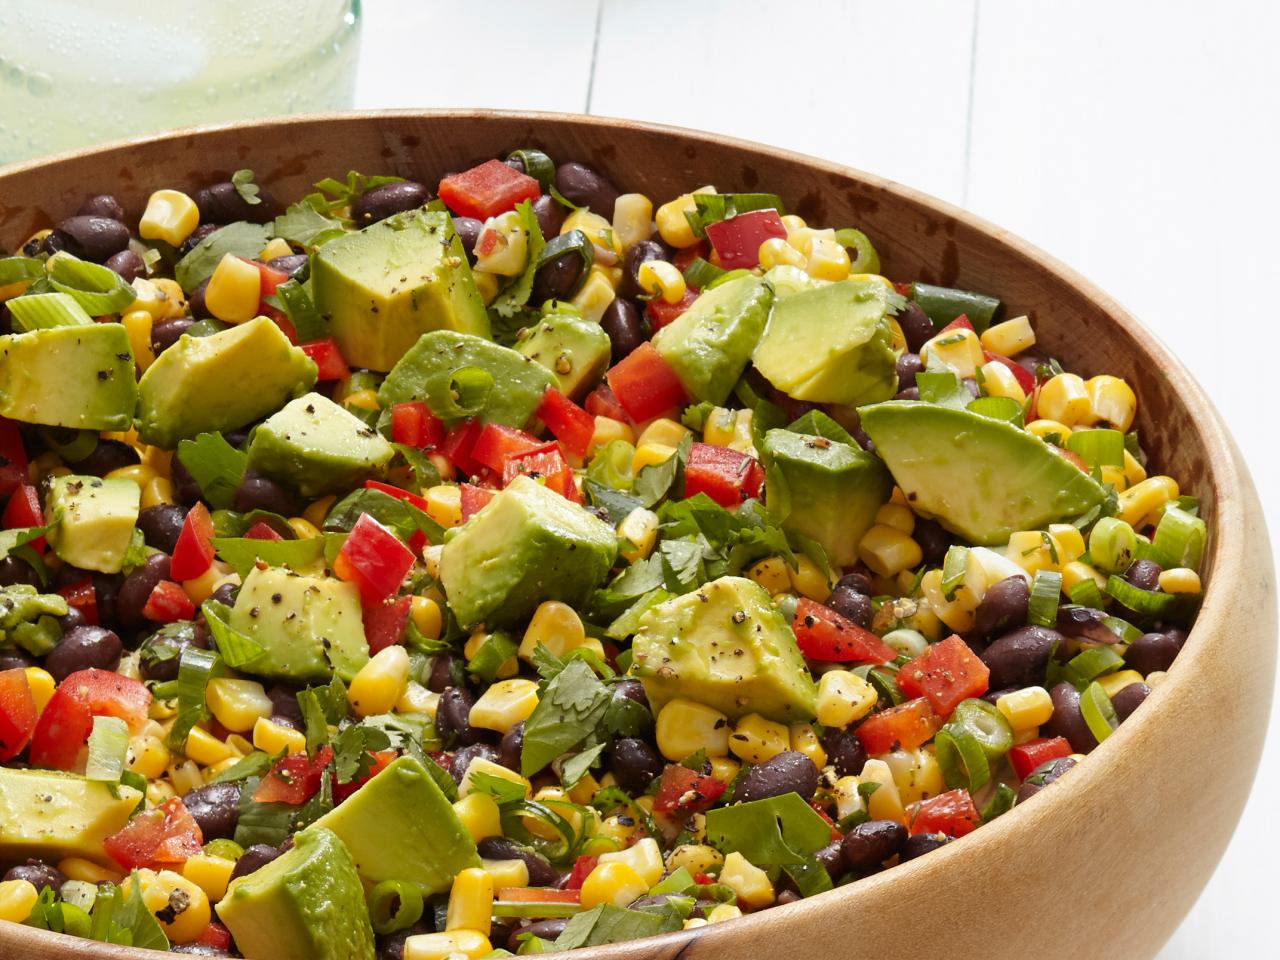 50 Picnic Salads | Recipes, Dinners and Easy Meal Ideas | Food Network